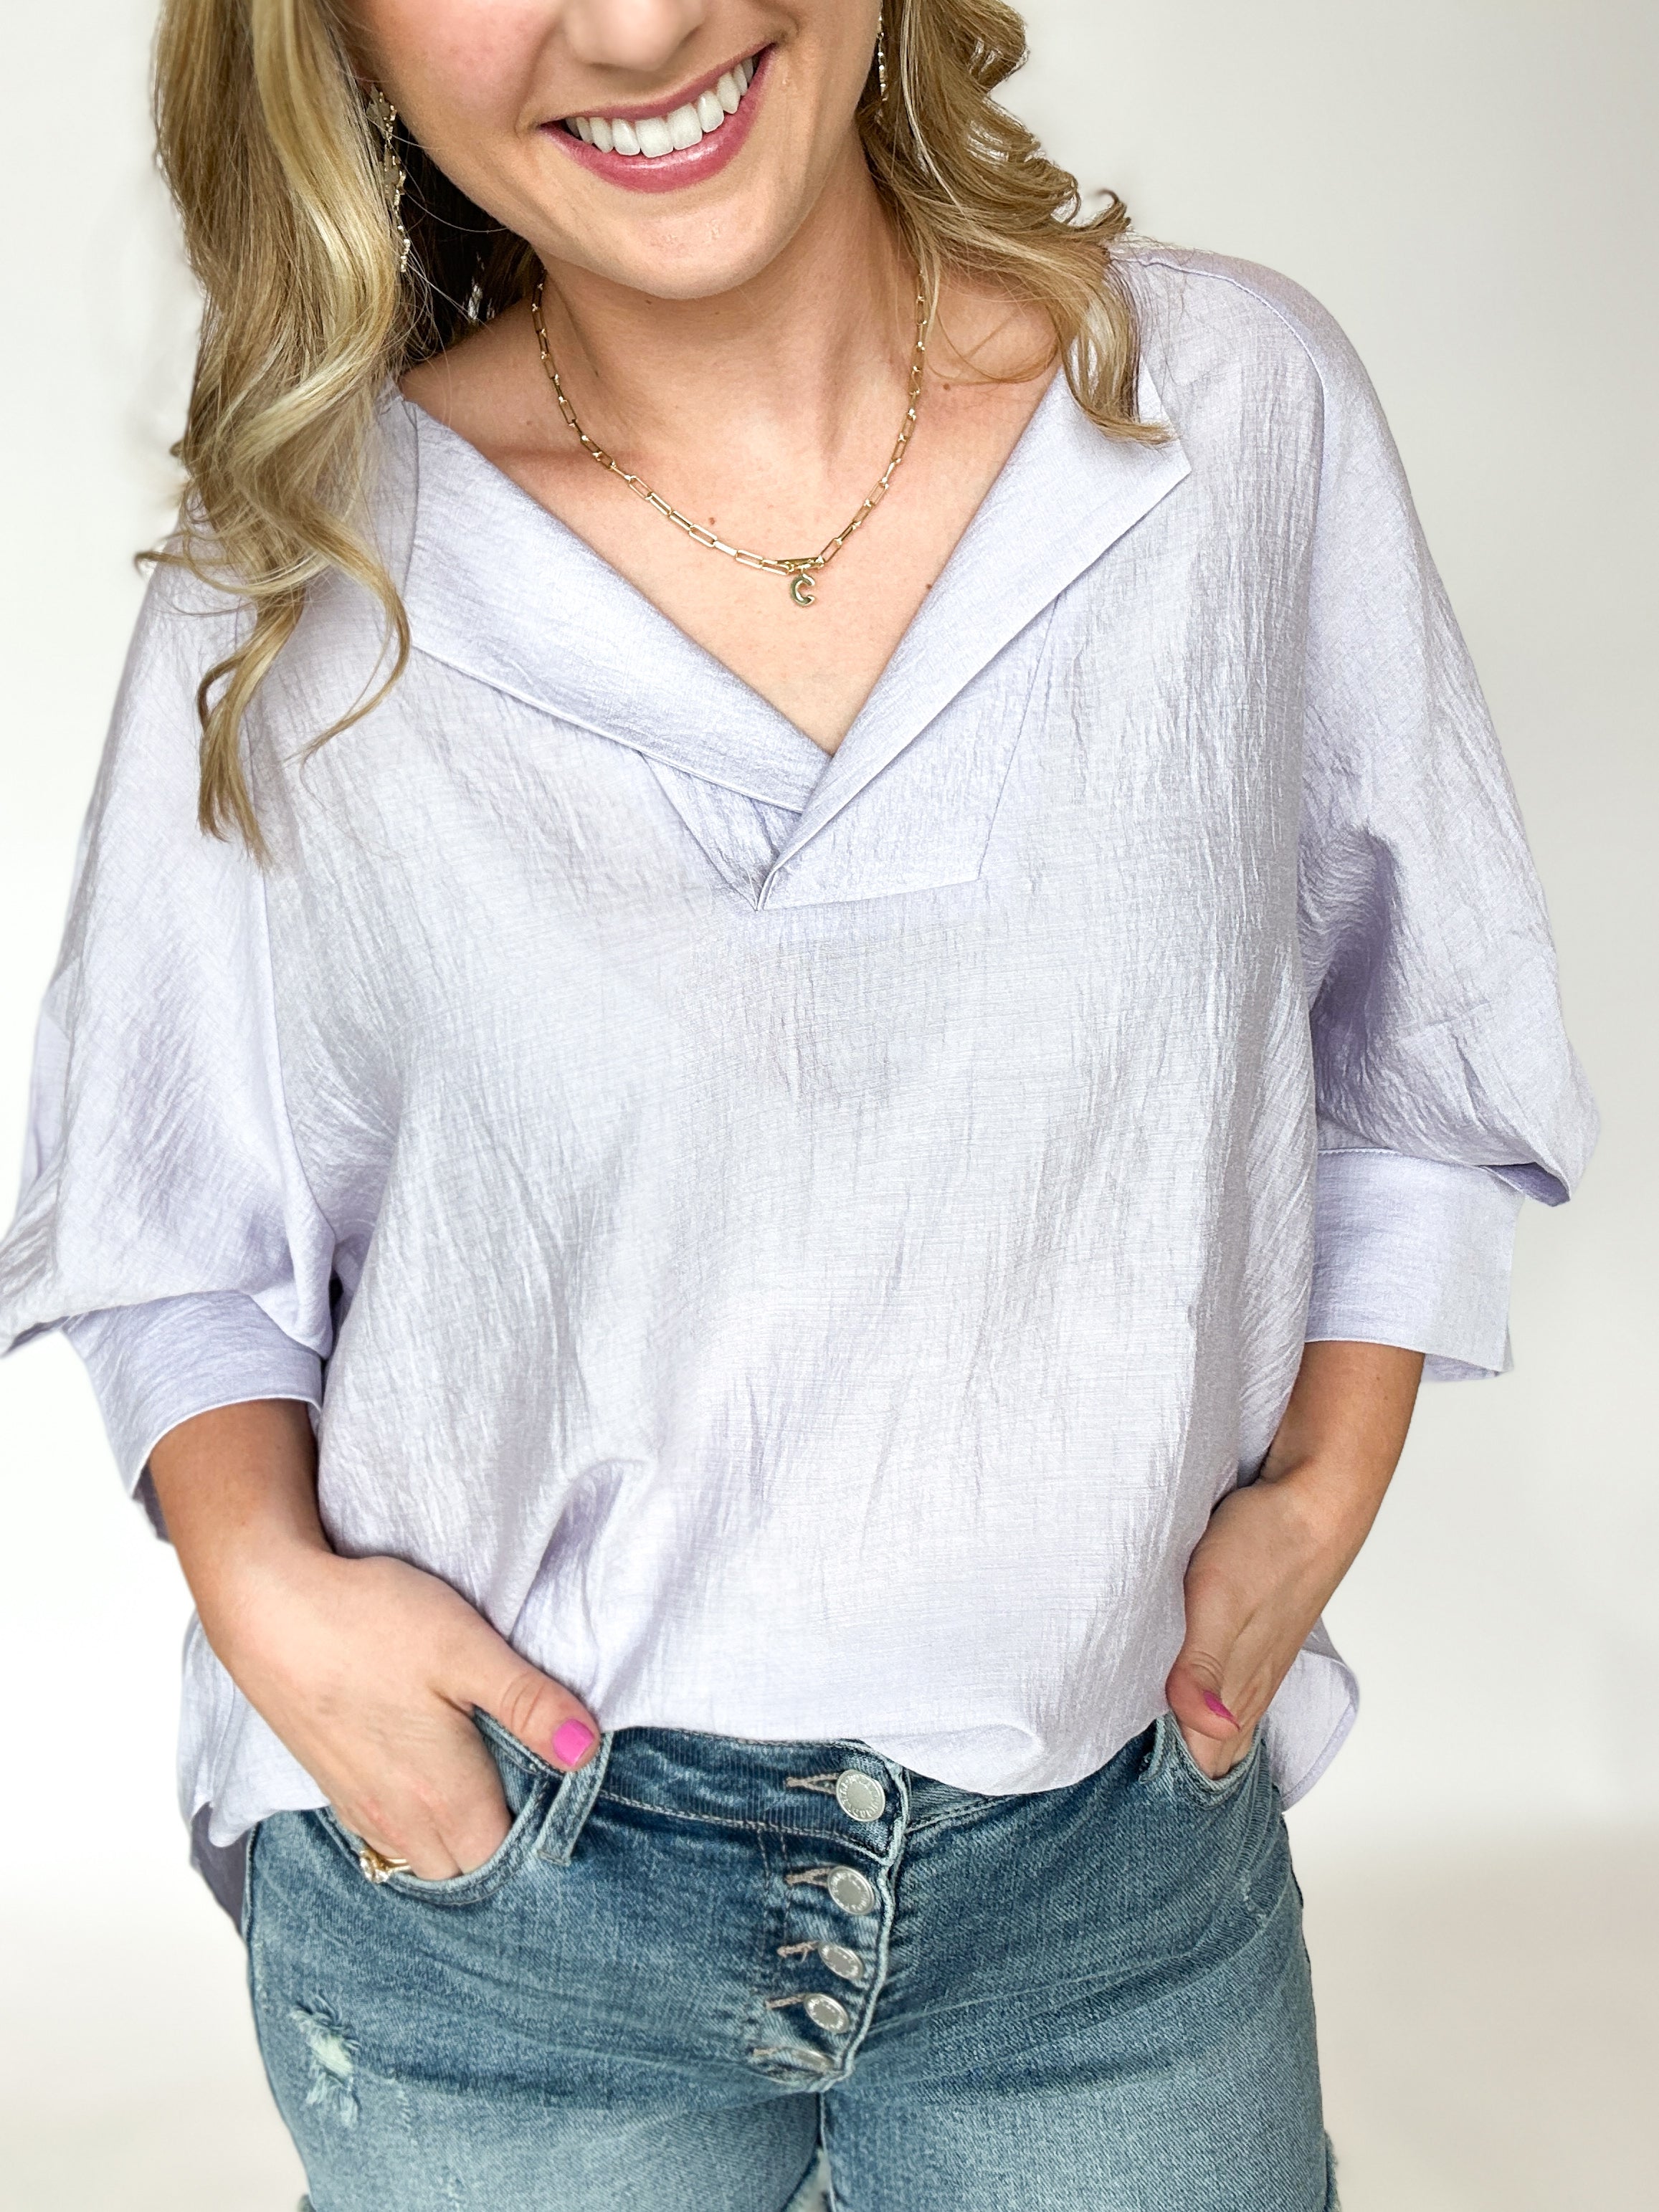 Oversized Collared Blouse - Lilac-200 Fashion Blouses-ALLIE ROSE-July & June Women's Fashion Boutique Located in San Antonio, Texas